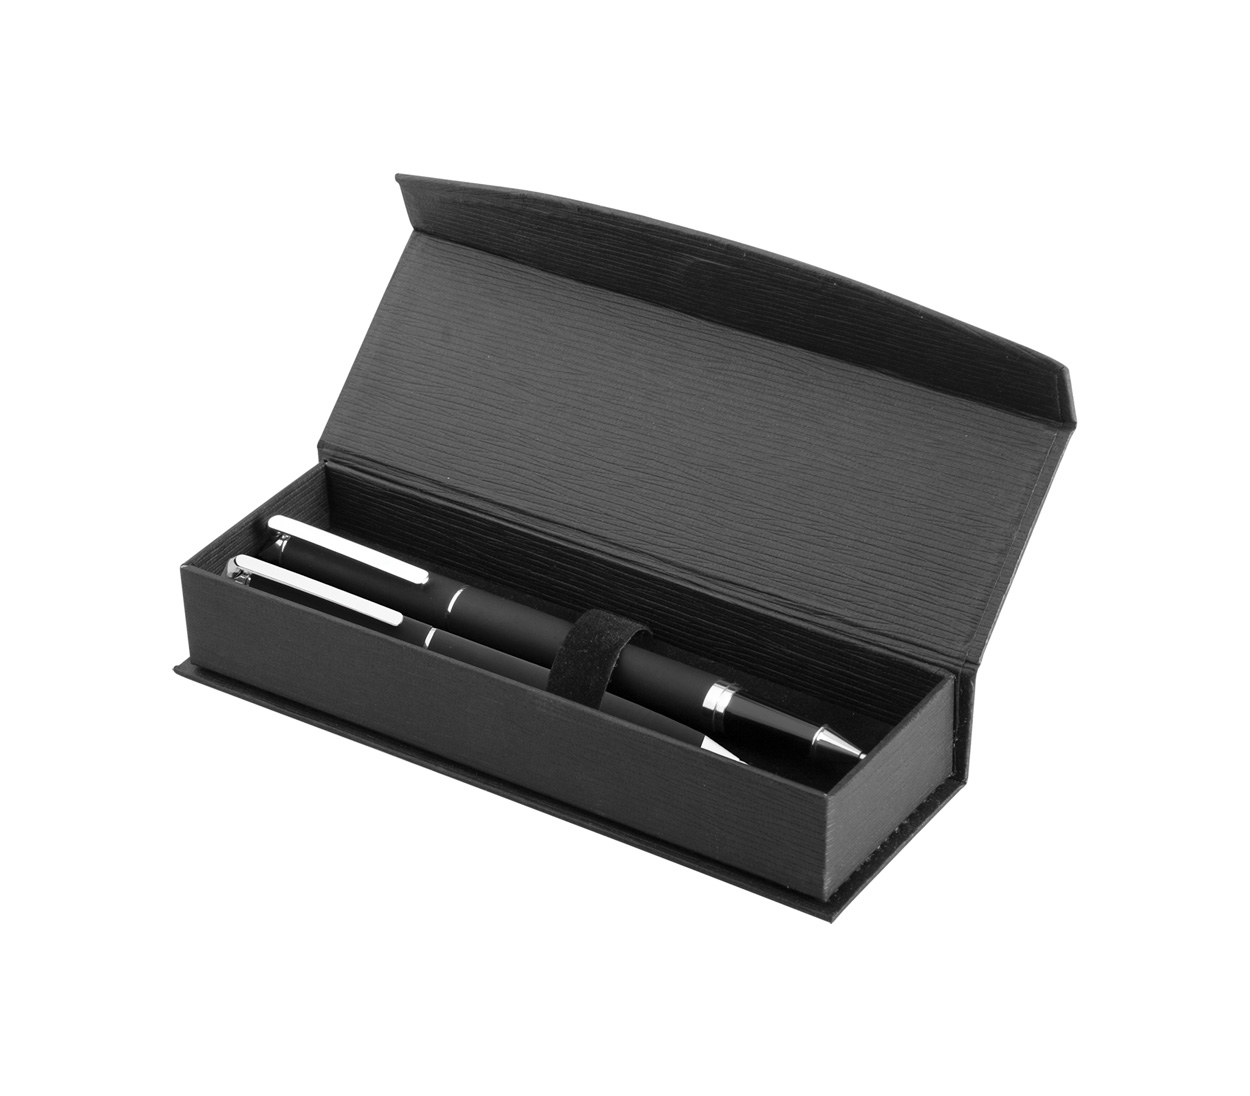 Metal pen and rollerball pen set GRACE in gift box - black